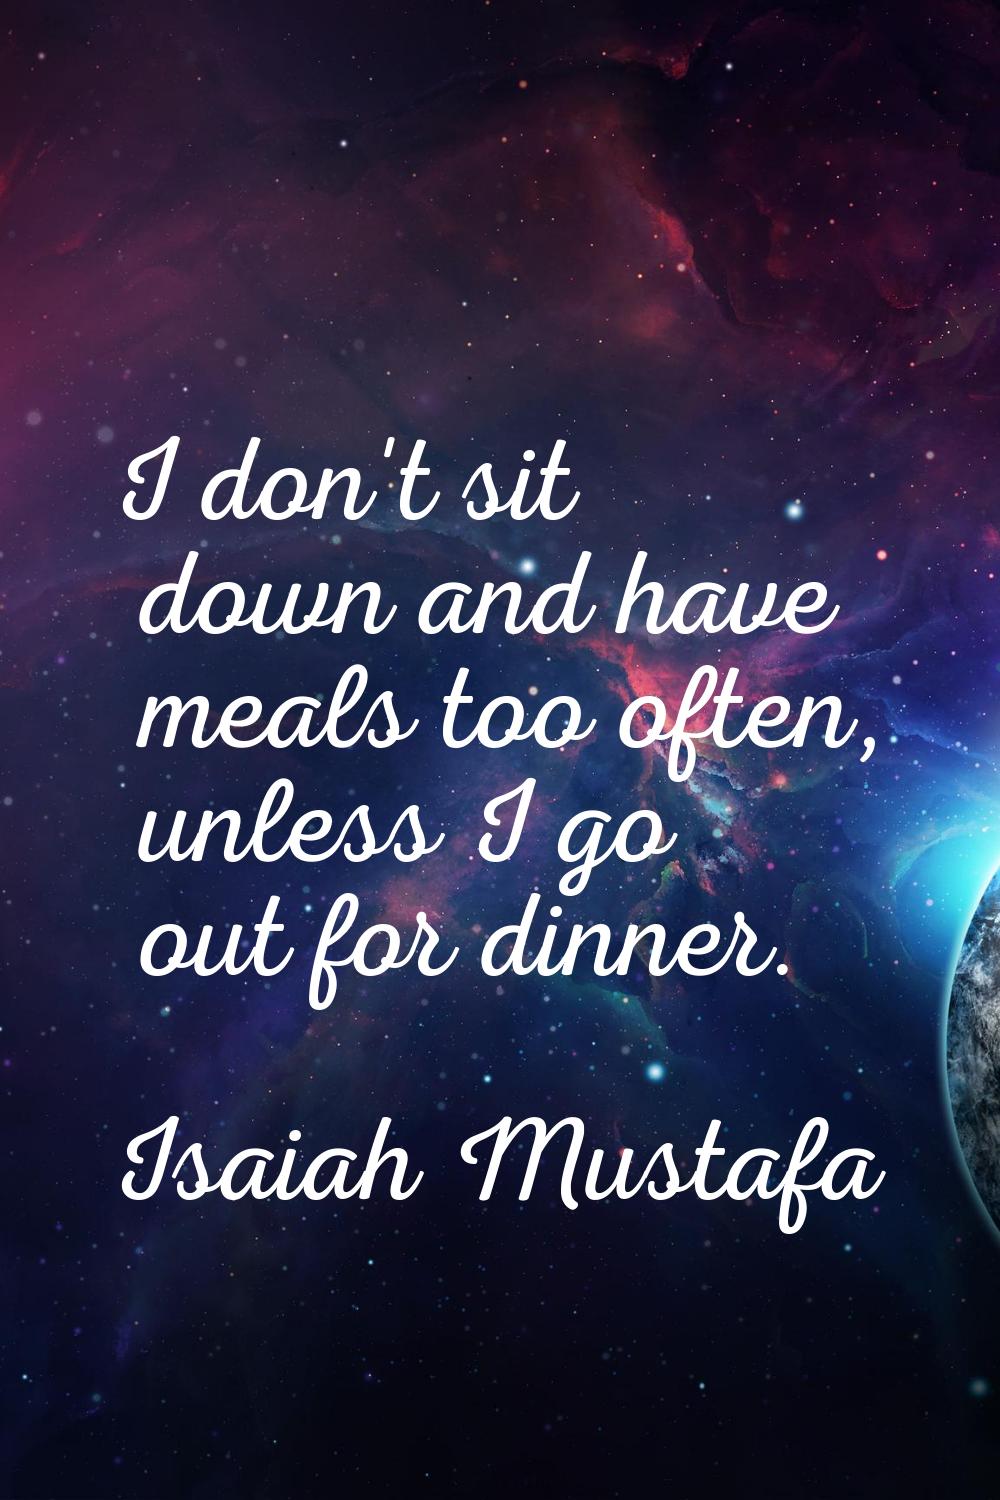 I don't sit down and have meals too often, unless I go out for dinner.